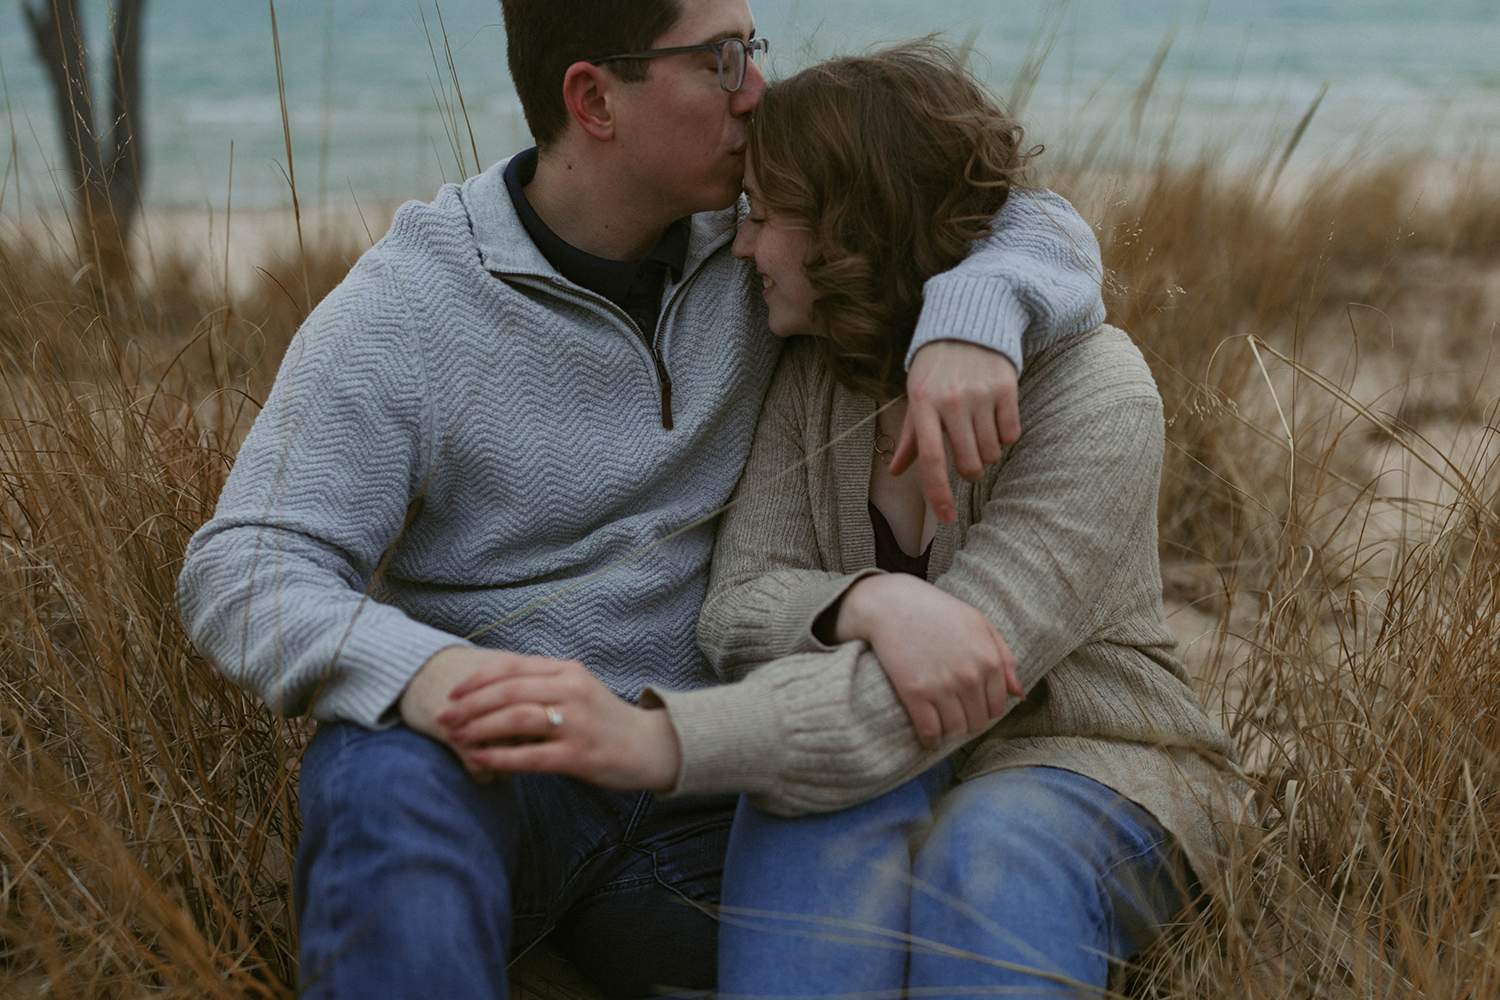 Couple snuggling in the grass together during their lighthouse beach engagement.